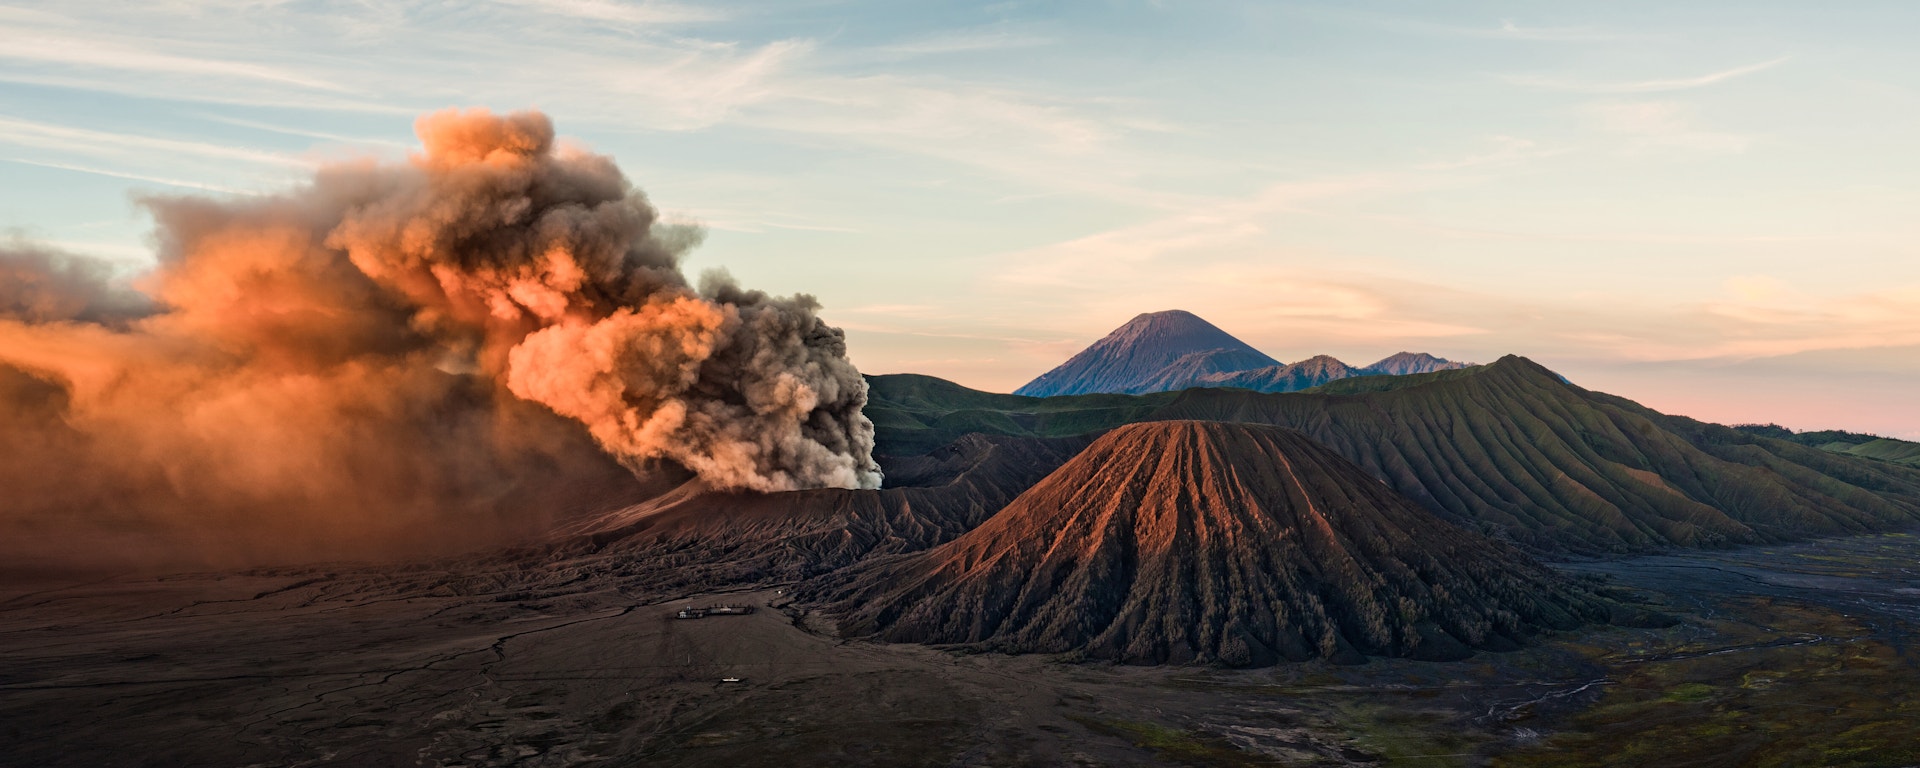 Indonesia Landscape Travel Photography April 10th Extremely Active Mount Bromo Throwing up Ash Clouds at sunrise in May 2011 with Mount Sumeru in the Background Gunug Bromo East Java Indonesia Asia